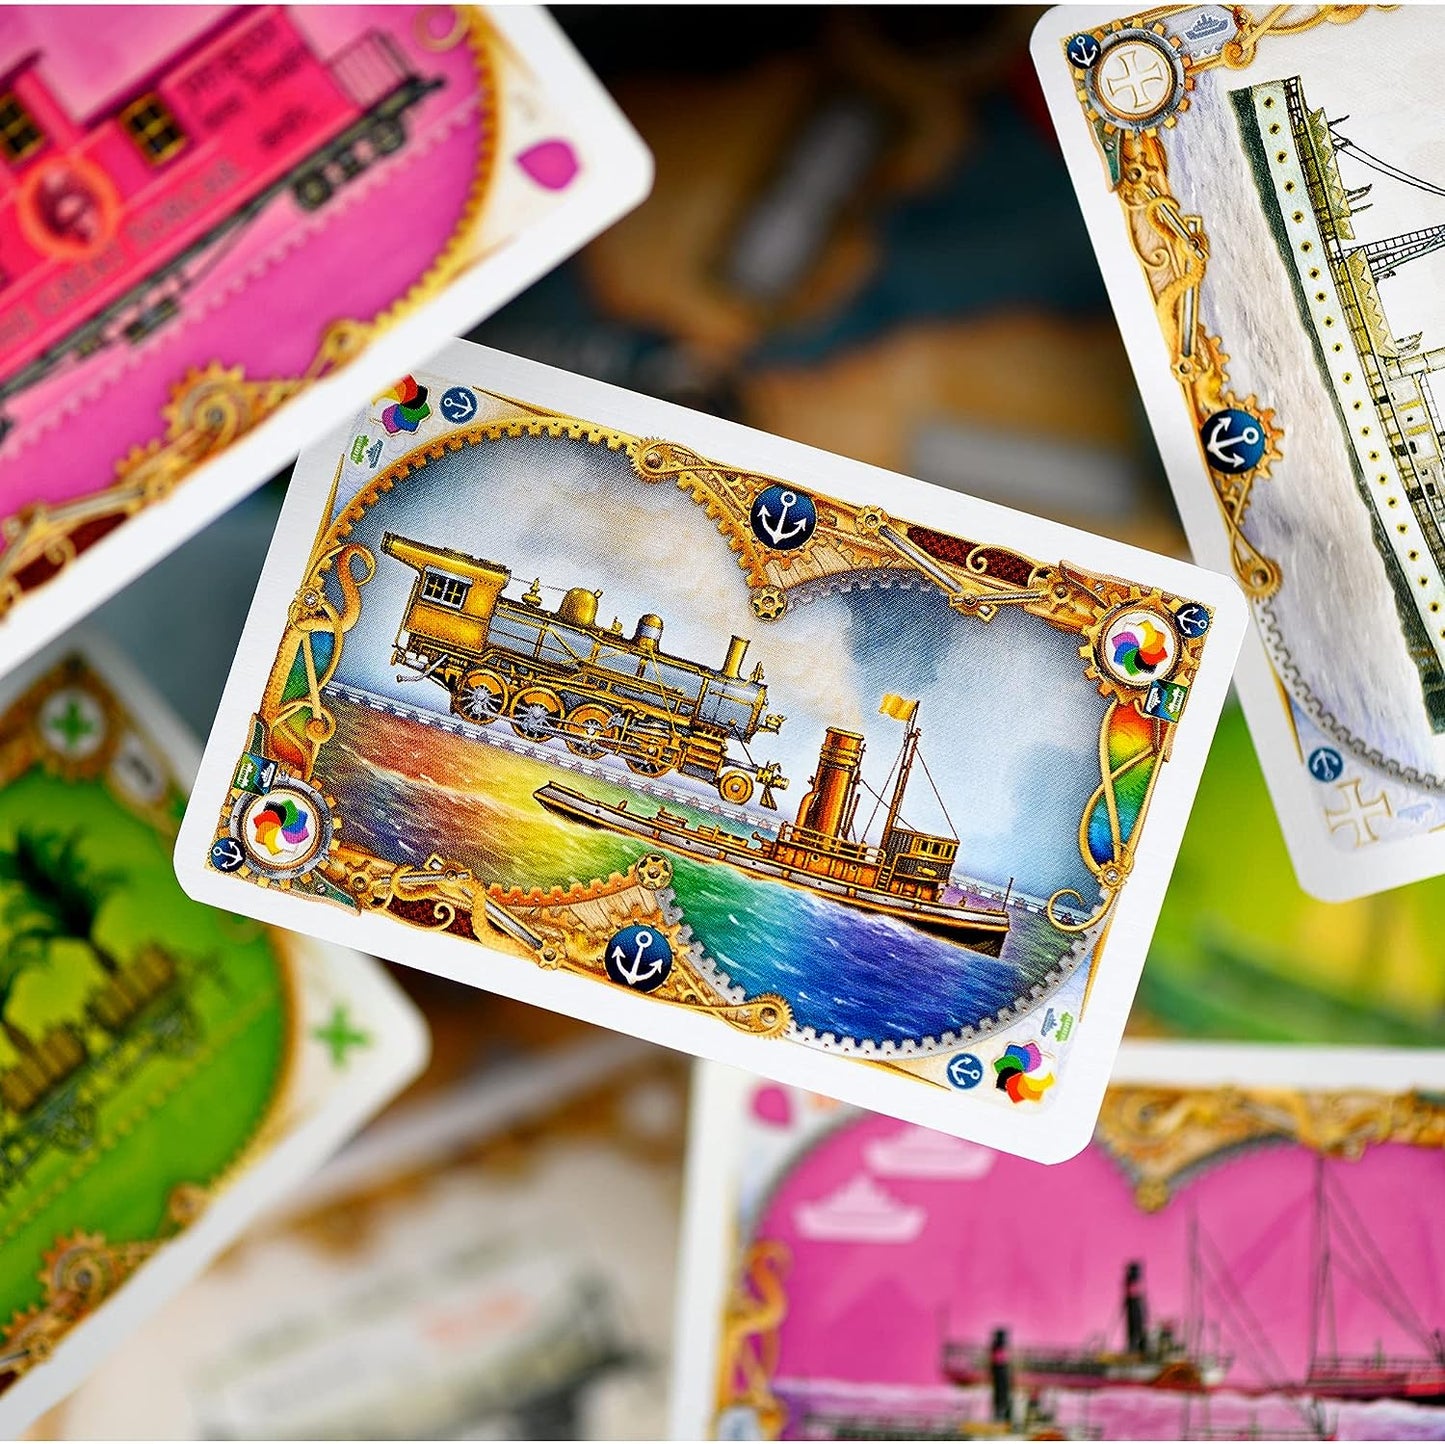 Ticket to Ride: Rails to Sails